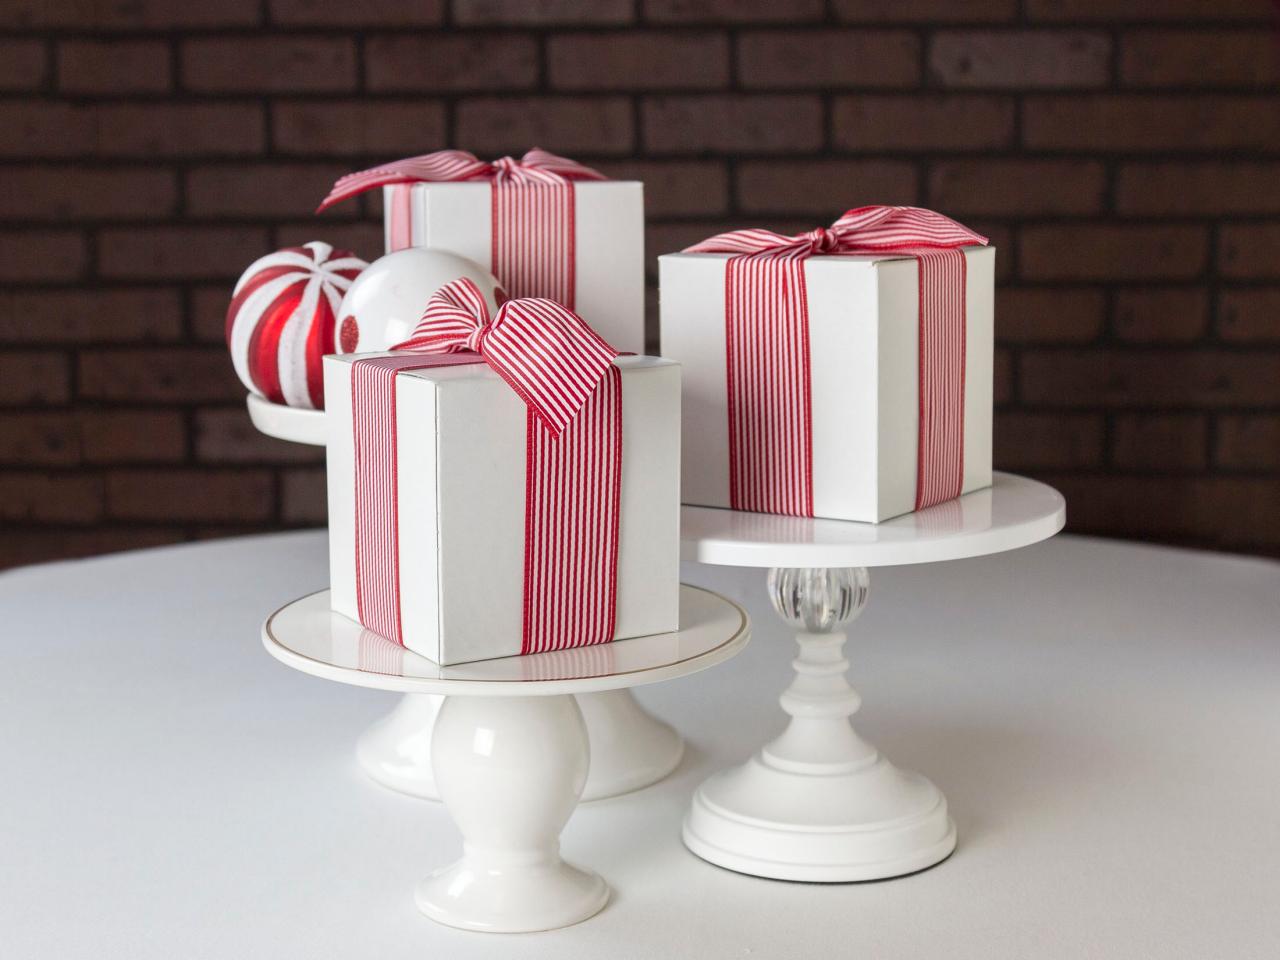 12 Gorgeous Cake Stand Ideas That'll You'll Want to See NOW!